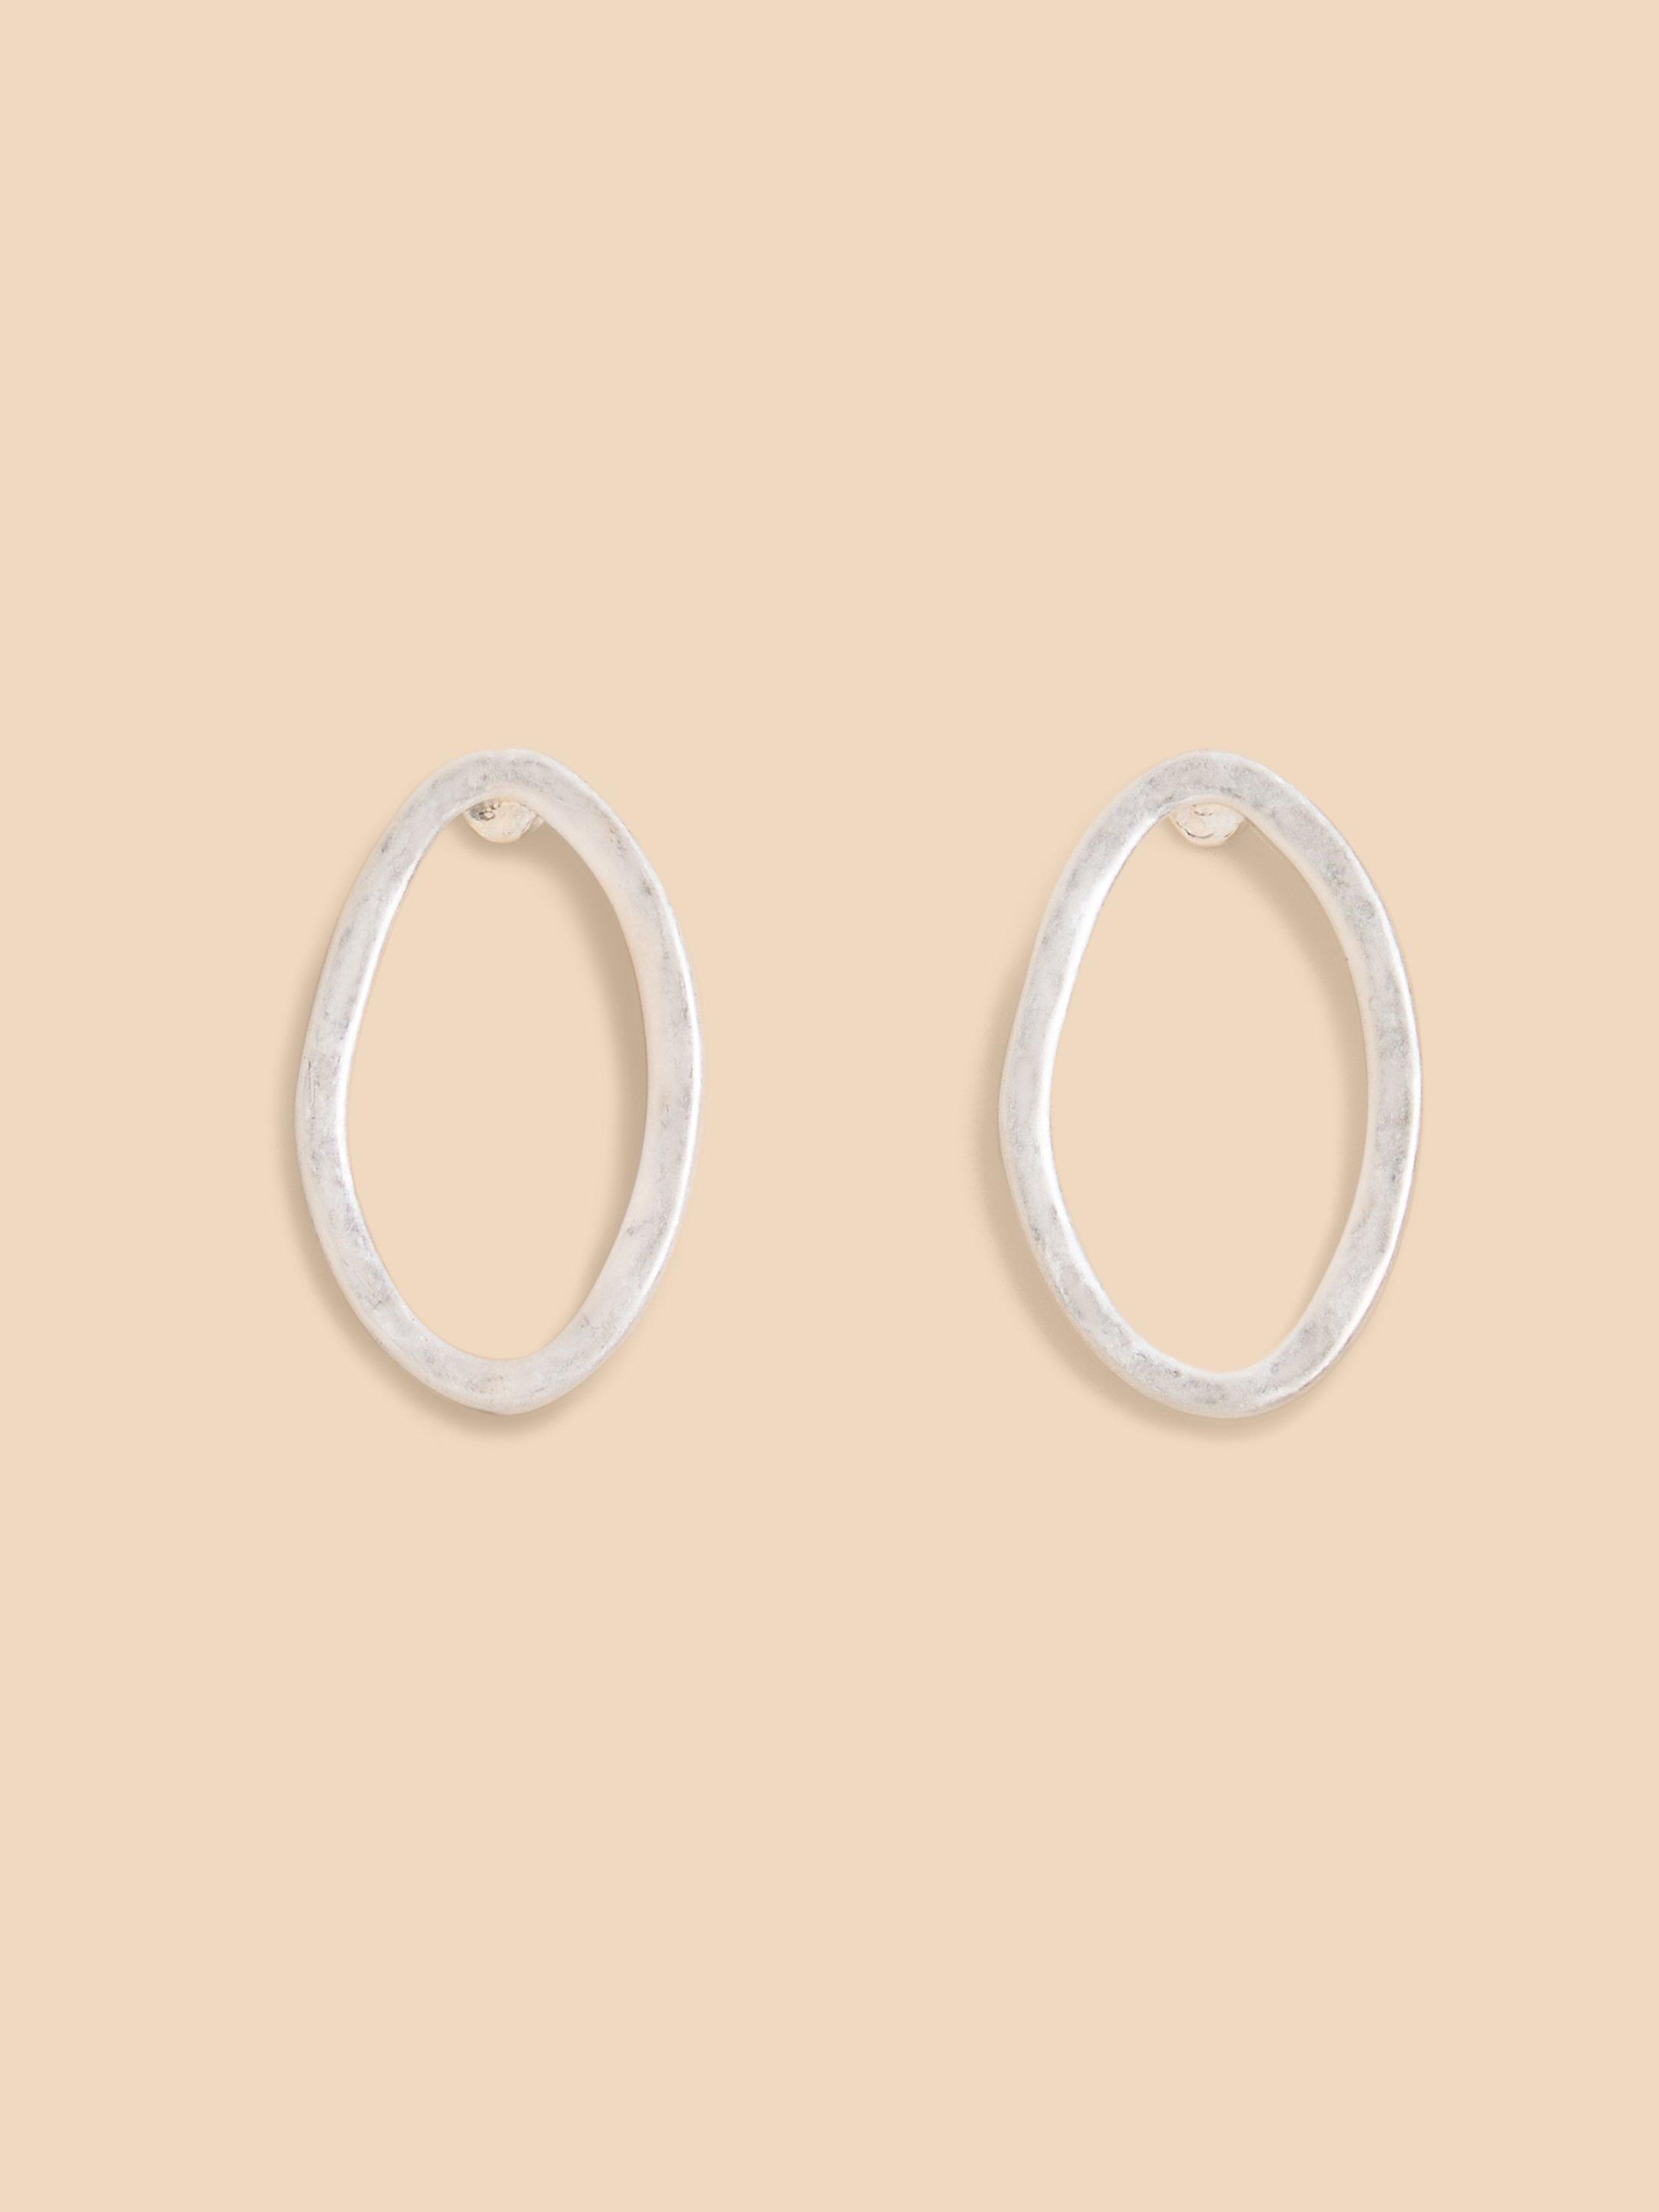 Oval Hammered Earrings